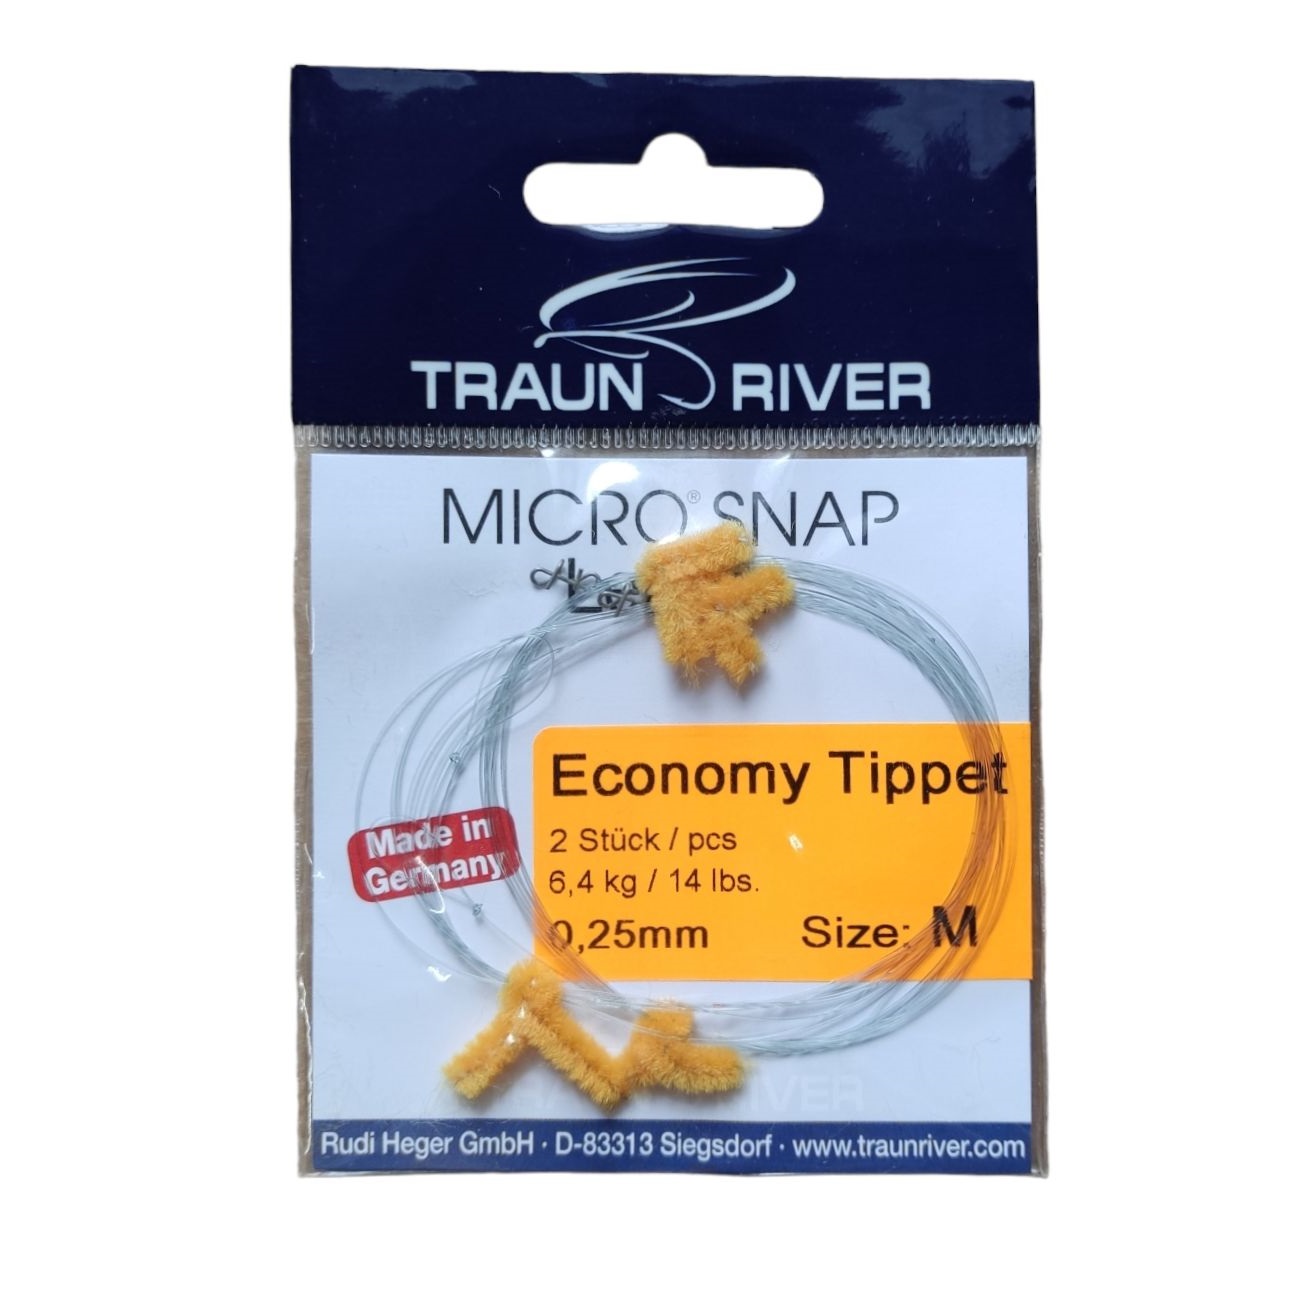 Micro Snap Economy Tippet (2er Pack)